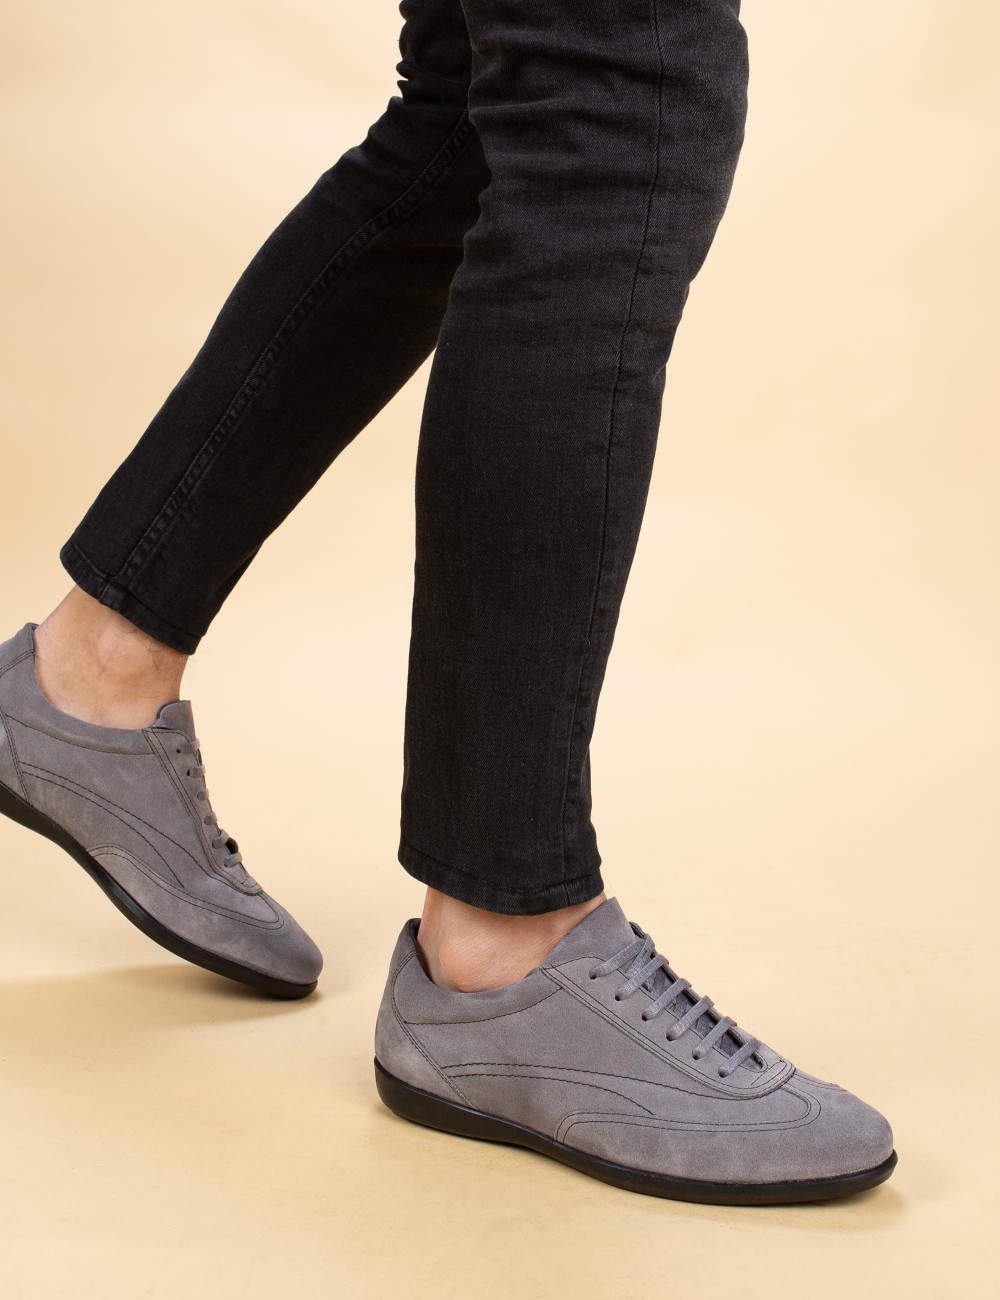 Gray Suede Leather Lace-up Shoes - 00321MGRIC02